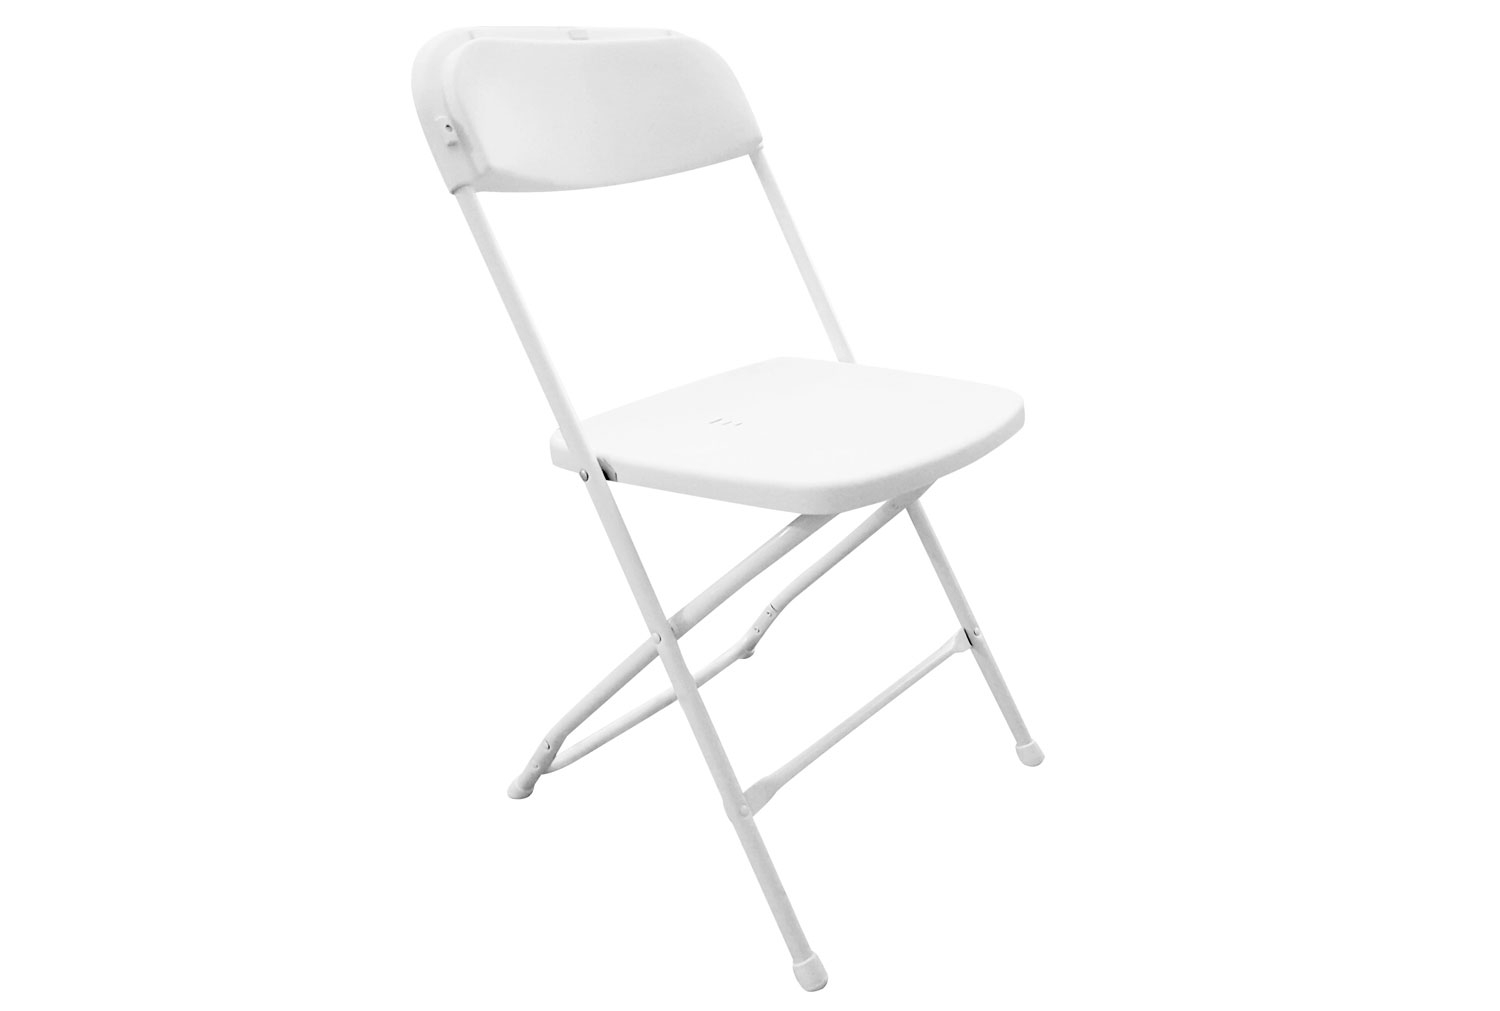 Qty 6 - Bunche Plastic Folding Office Chair, White